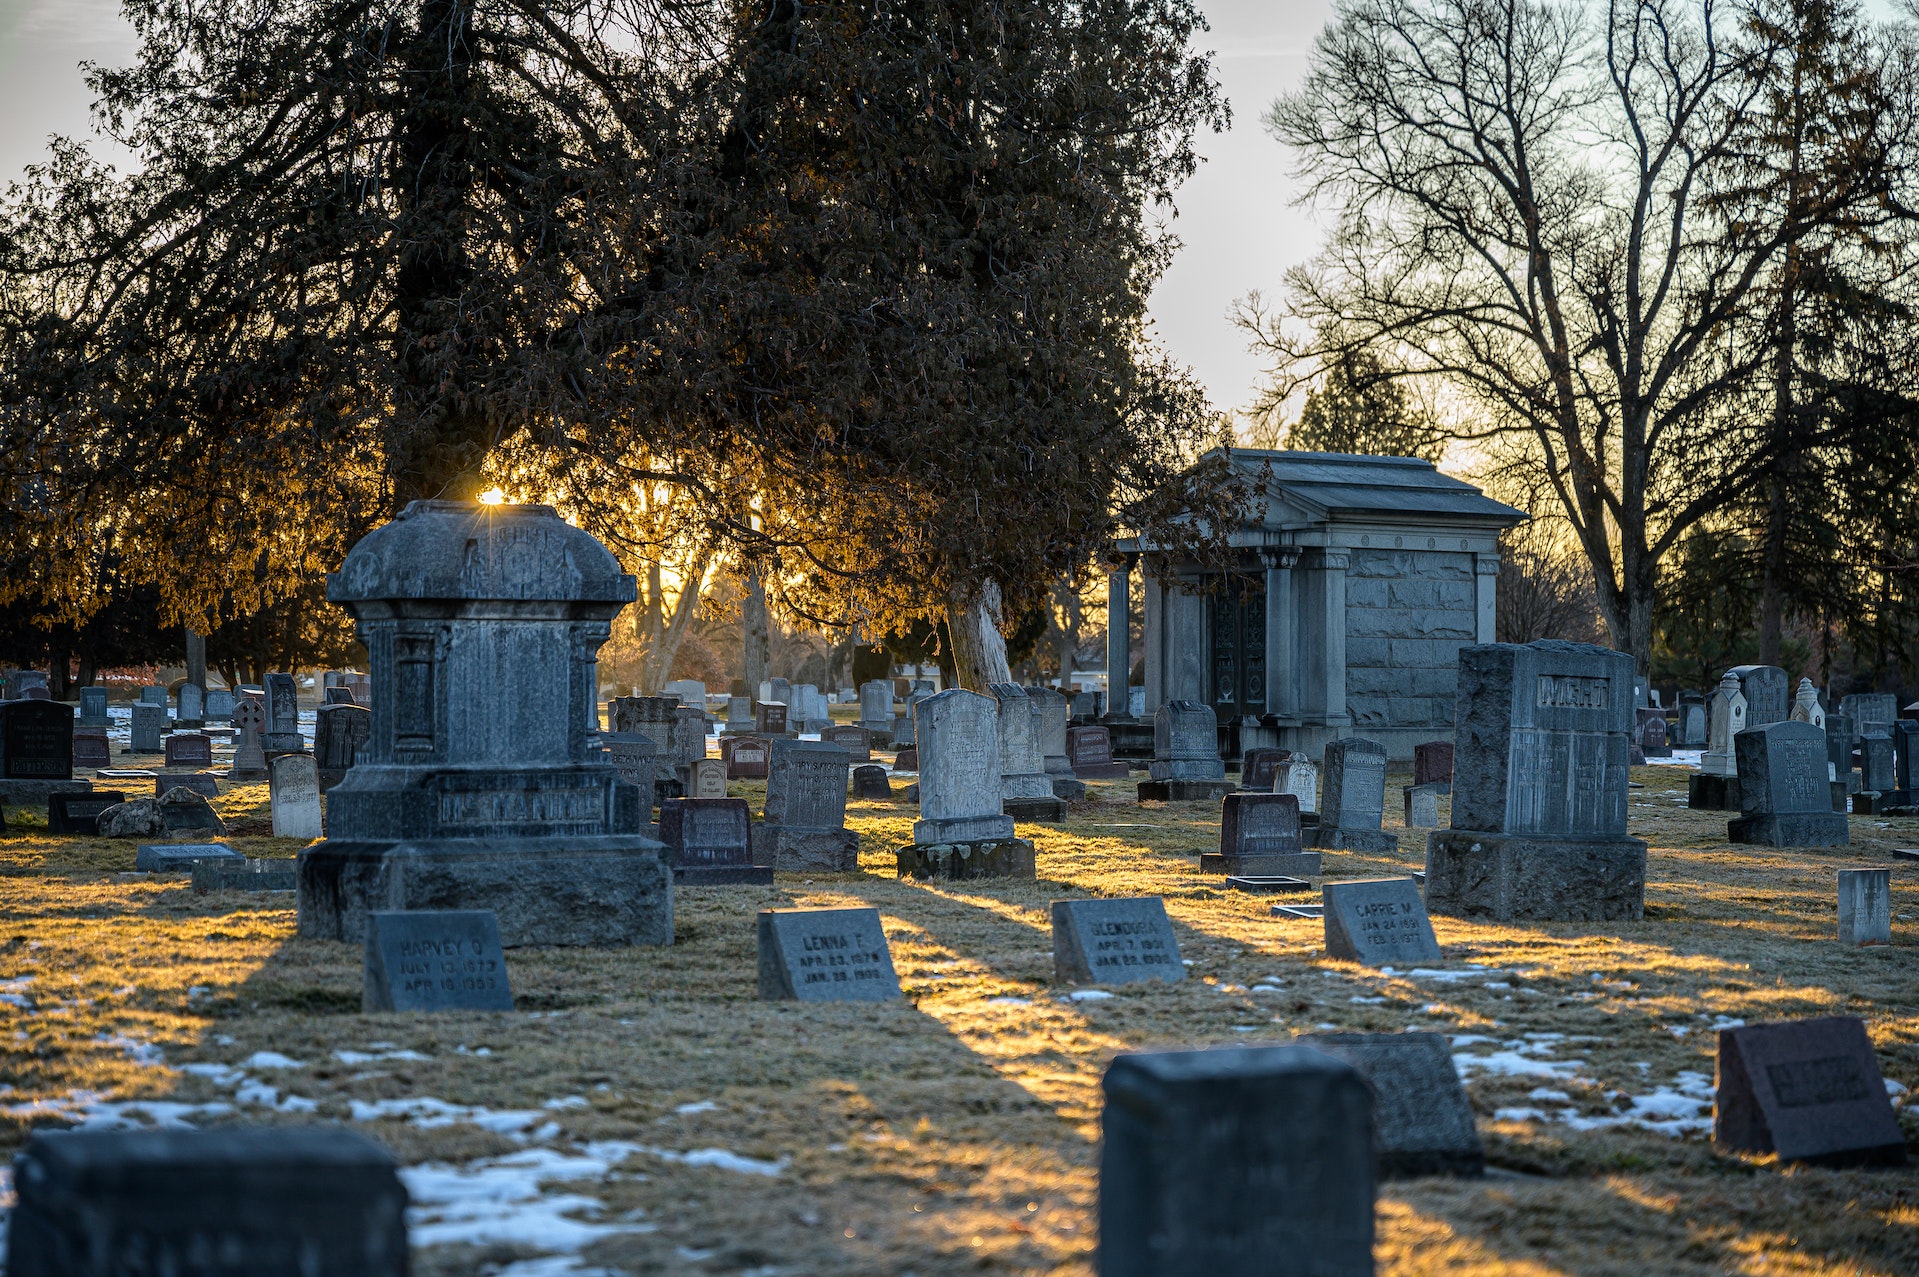 Cemetery License Requirements